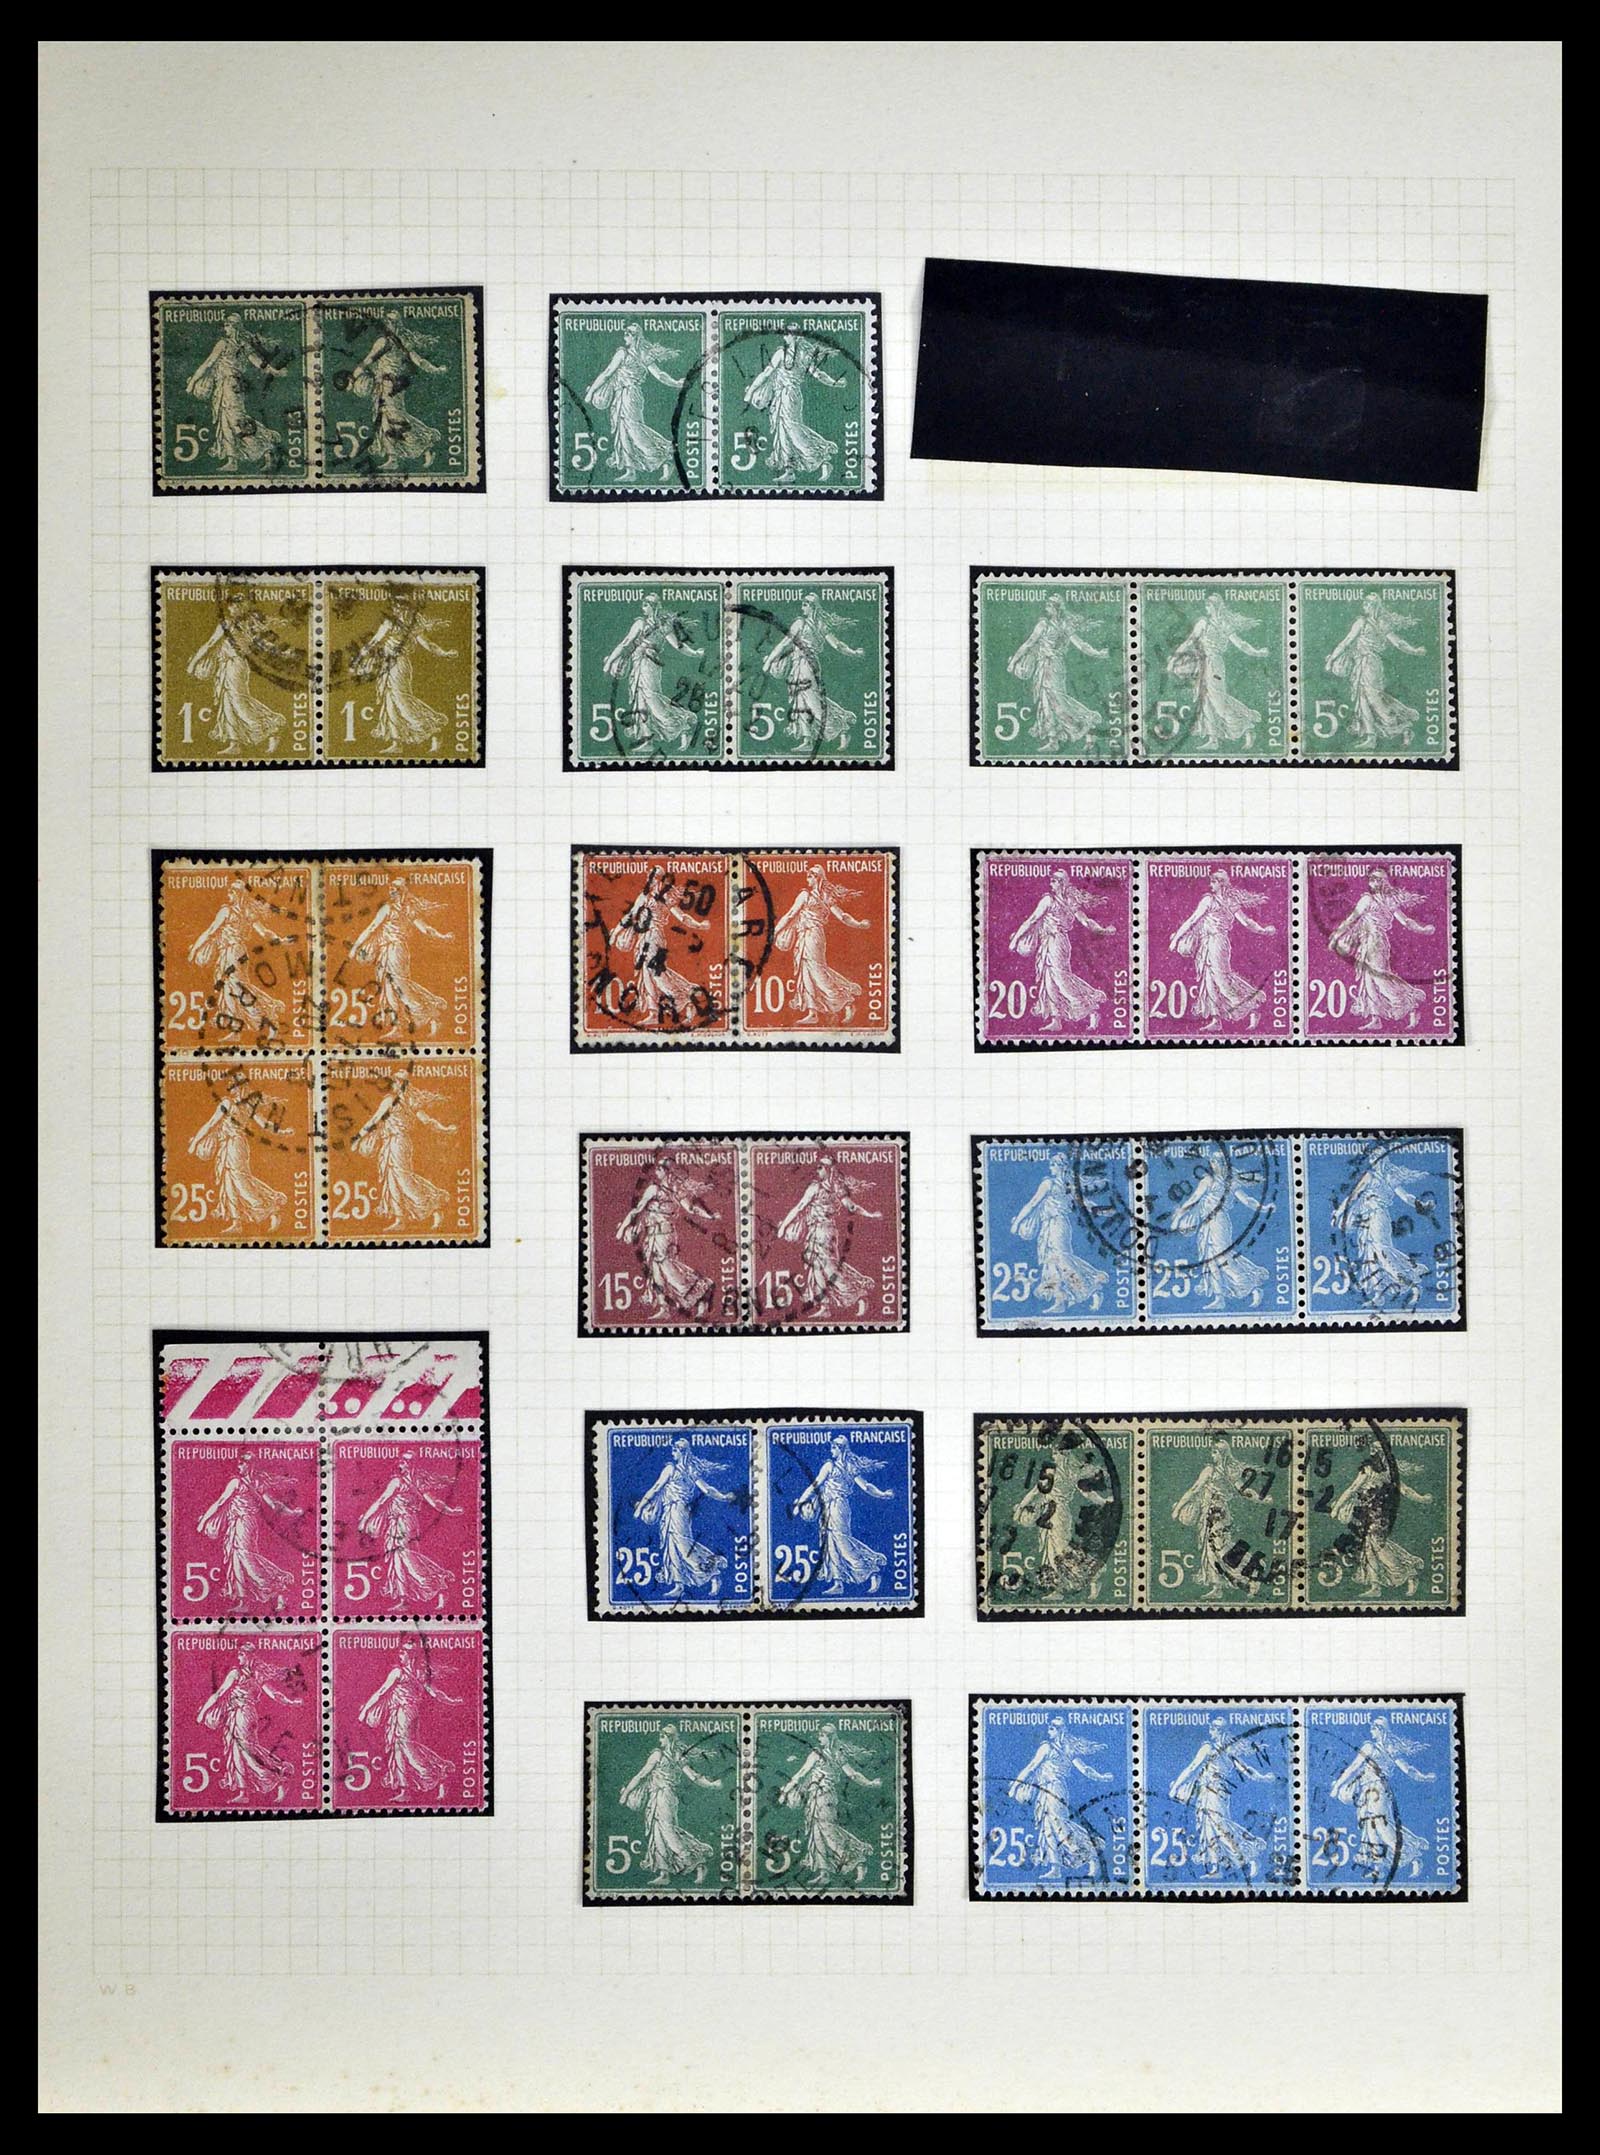 39329 0059 - Stamp collection 39329 France Semeuse.